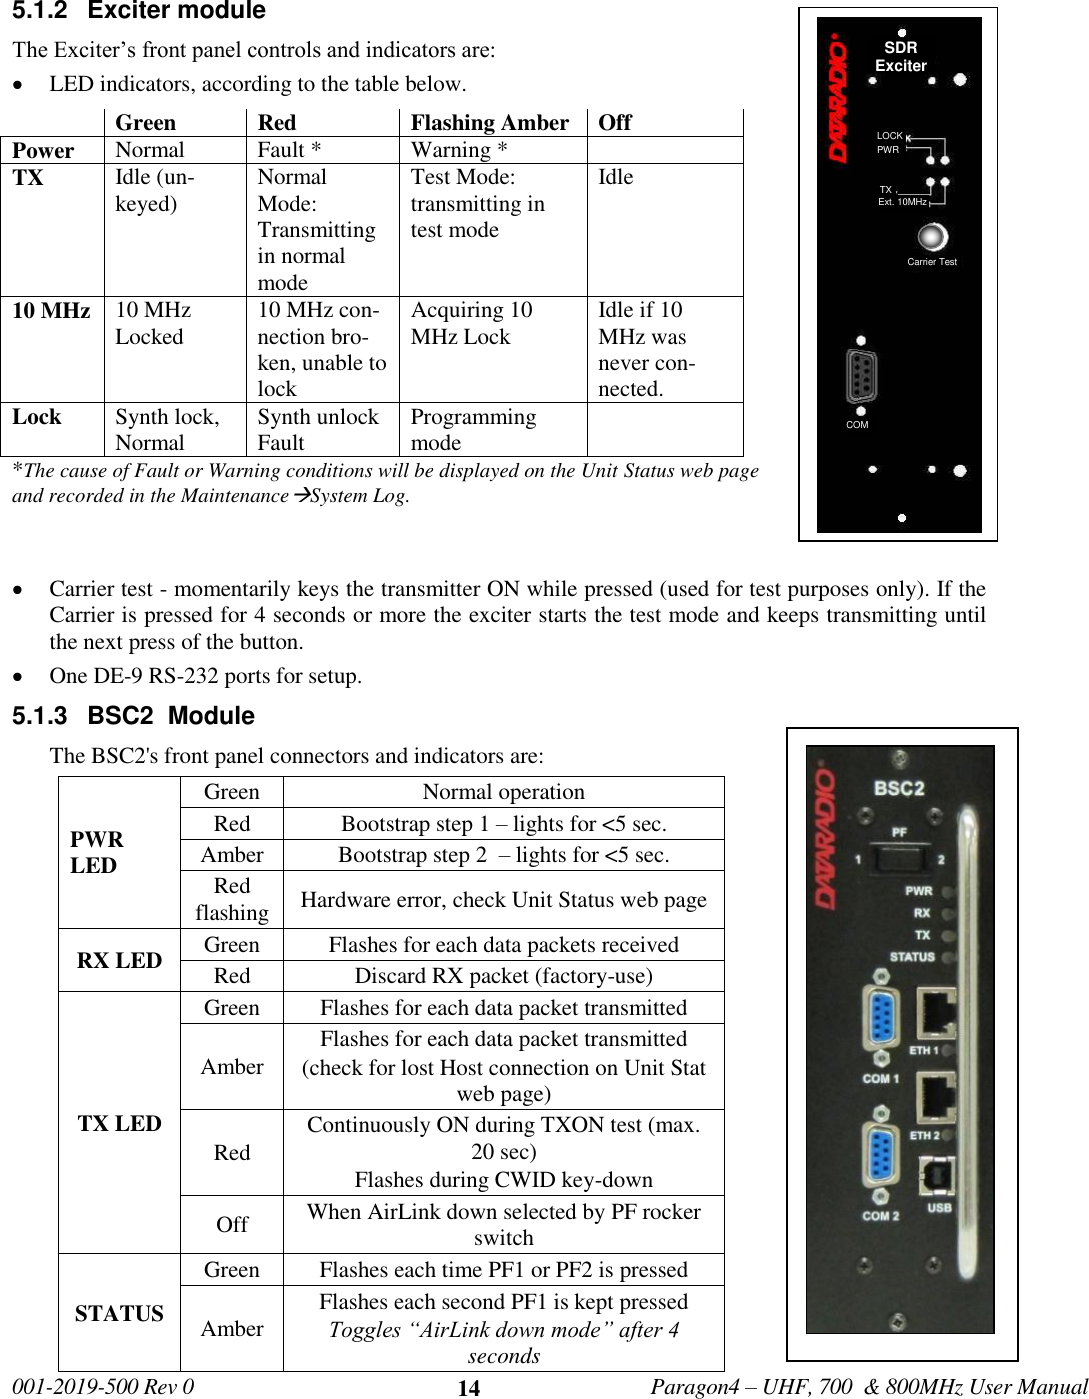   001-2019-500 Rev 0         Paragon4 – UHF, 700  &amp; 800MHz User Manual     14 5.1.2  Exciter module The Exciter’s front panel controls and indicators are:  LED indicators, according to the table below. *The cause of Fault or Warning conditions will be displayed on the Unit Status web page and recorded in the MaintenanceSystem Log.     Carrier test - momentarily keys the transmitter ON while pressed (used for test purposes only). If the Carrier is pressed for 4 seconds or more the exciter starts the test mode and keeps transmitting until the next press of the button.  One DE-9 RS-232 ports for setup.                    5.1.3  BSC2  Module The BSC2&apos;s front panel connectors and indicators are:                 Green Red Flashing Amber Off Power Normal Fault * Warning *  TX Idle (un-keyed) Normal Mode: Transmitting in normal mode Test Mode:  transmitting in test mode Idle 10 MHz 10 MHz Locked 10 MHz con-nection bro-ken, unable to lock Acquiring 10 MHz Lock Idle if 10 MHz was never con-nected. Lock Synth lock, Normal Synth unlock Fault  Programming mode  PWR LED Green  Normal operation Red  Bootstrap step 1 – lights for &lt;5 sec. Amber Bootstrap step 2  – lights for &lt;5 sec. Red flashing Hardware error, check Unit Status web page RX LED Green  Flashes for each data packets received Red          Discard RX packet (factory-use) TX LED Green  Flashes for each data packet transmitted Amber Flashes for each data packet transmitted  (check for lost Host connection on Unit Stat web page) Red Continuously ON during TXON test (max. 20 sec) Flashes during CWID key-down Off  When AirLink down selected by PF rocker switch STATUS Green  Flashes each time PF1 or PF2 is pressed Amber Flashes each second PF1 is kept pressed  Toggles “AirLink down mode” after 4 seconds  LOCK PWR TX Ext. 10MHz COM Carrier Test  SDR Exciter 